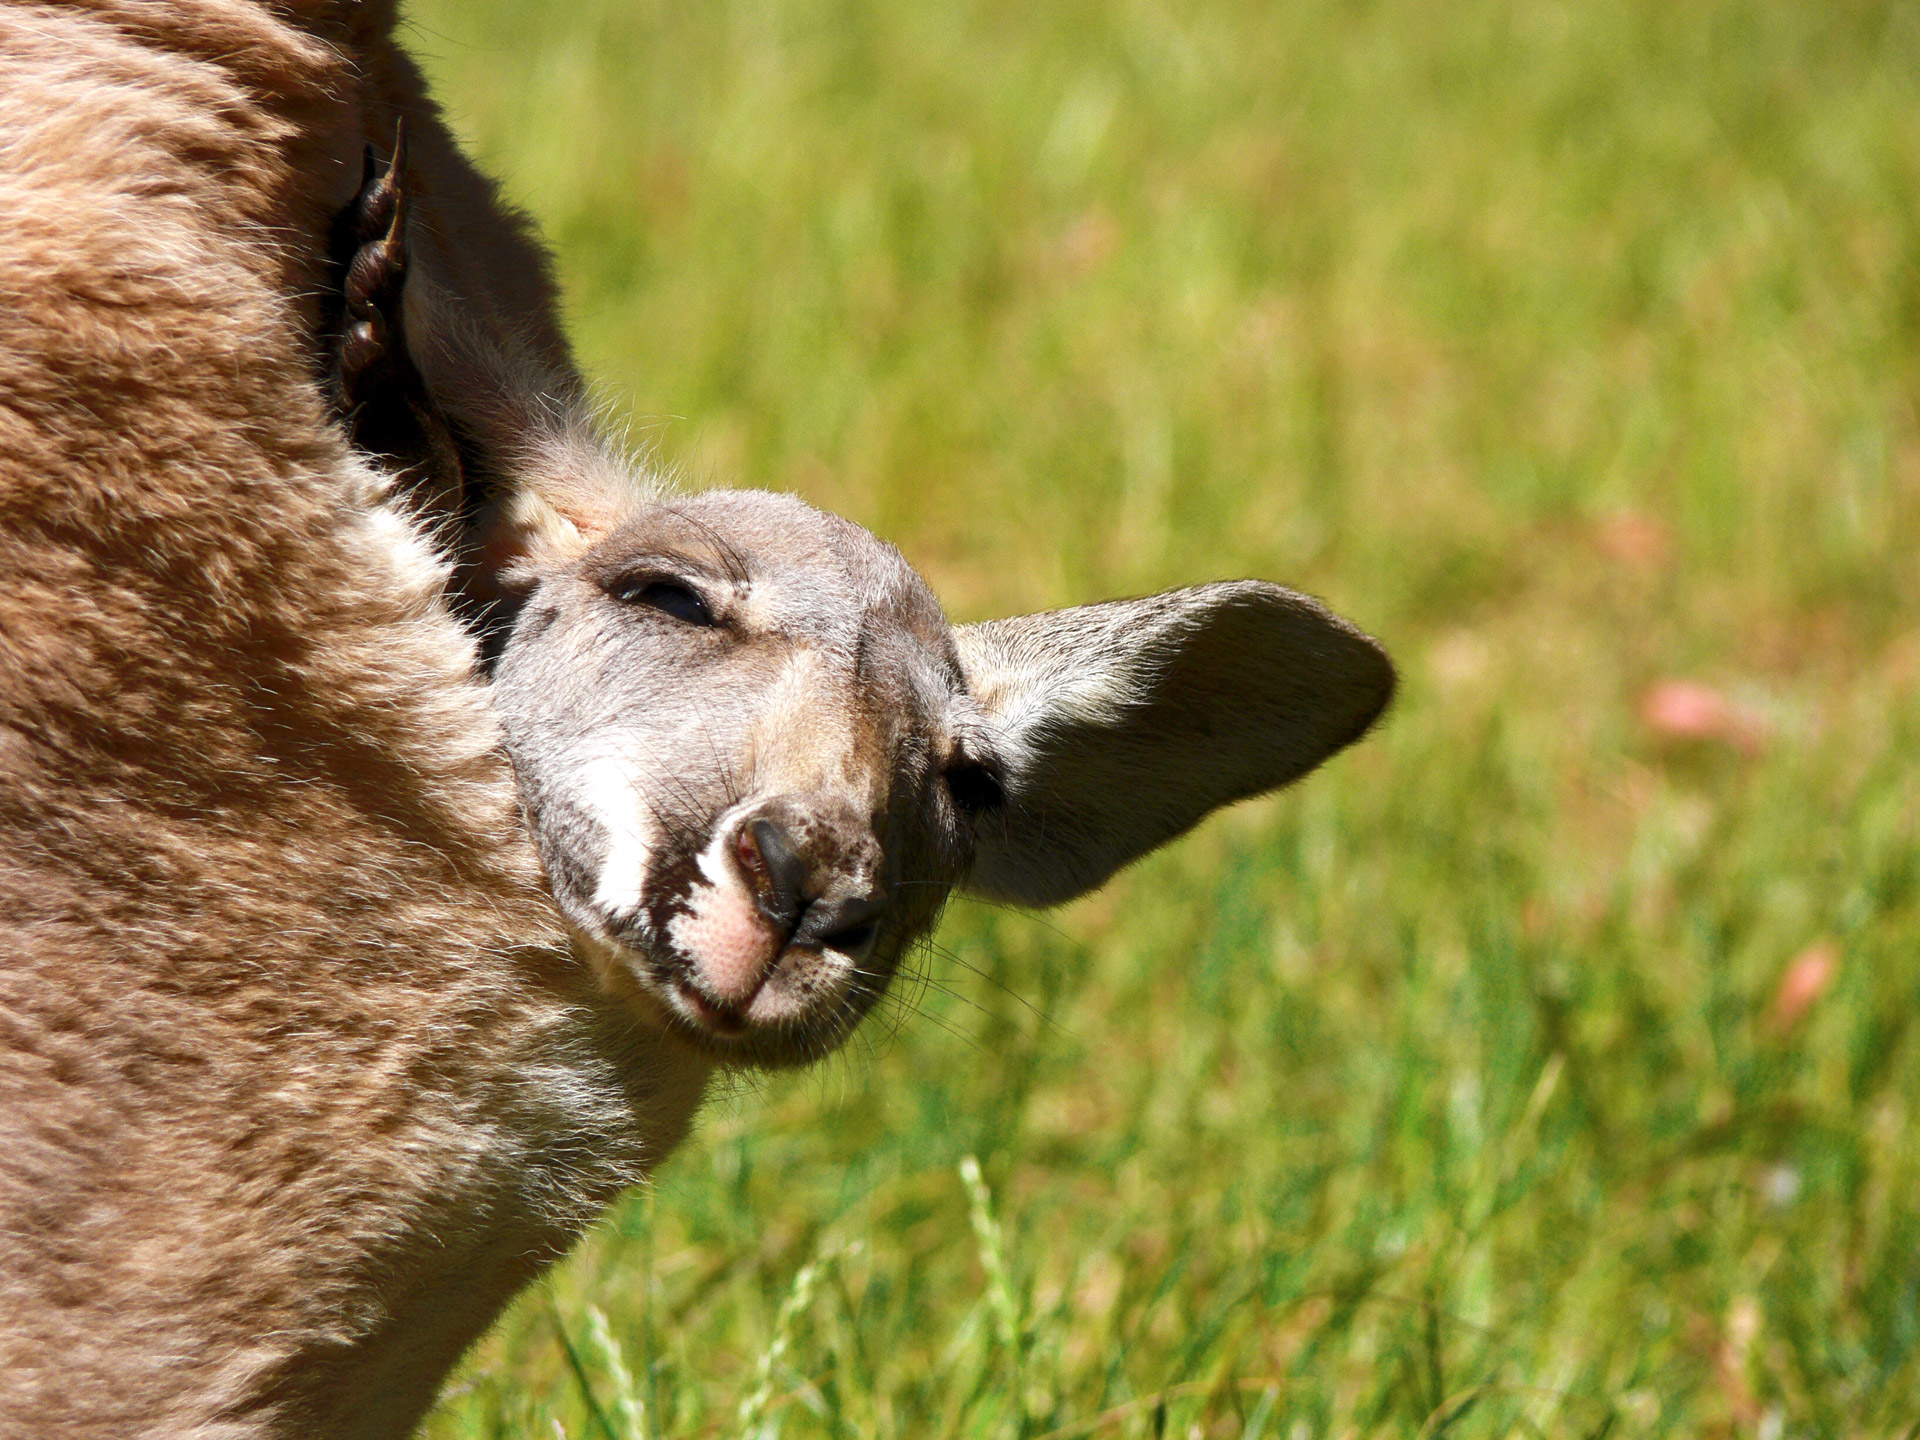 Grey kangaroo joey with head sticking out of mother's pouch